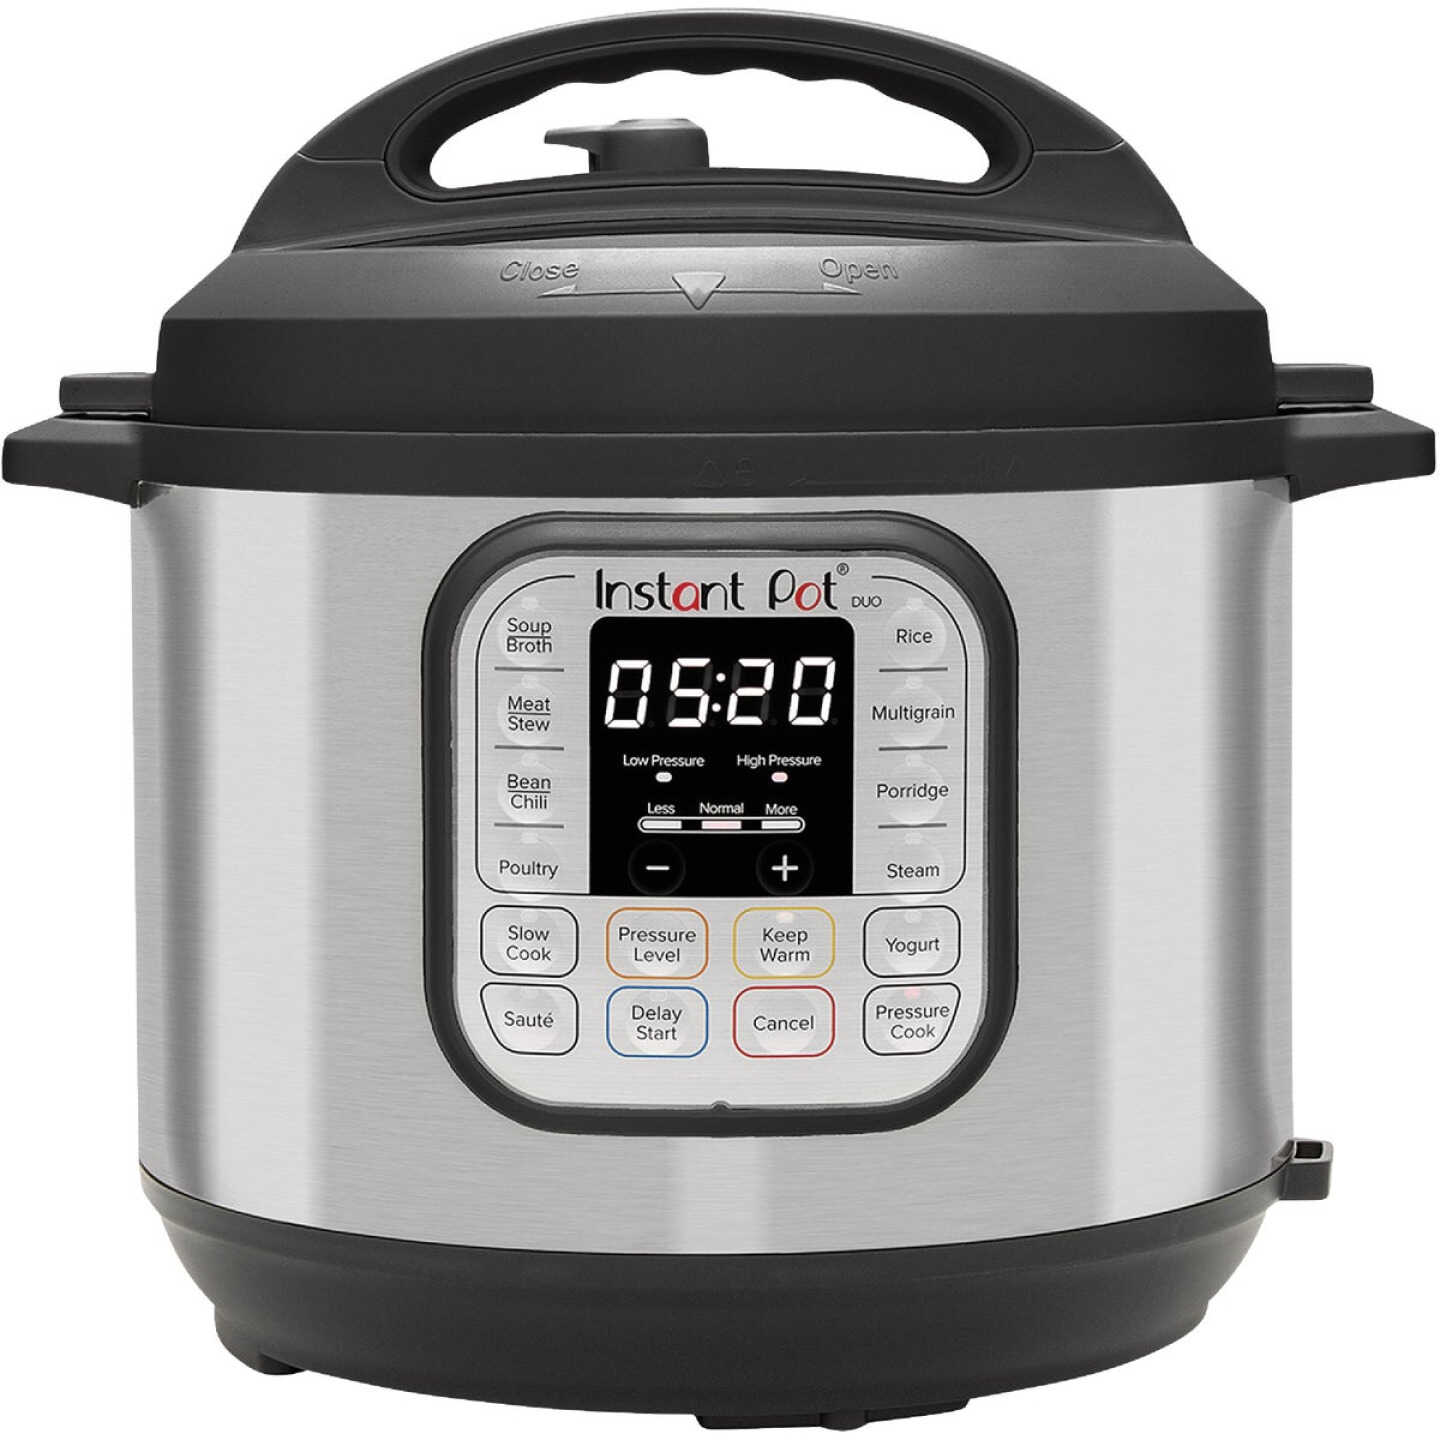 The Best Multicookers For Versatile One-Pot Cooking Function